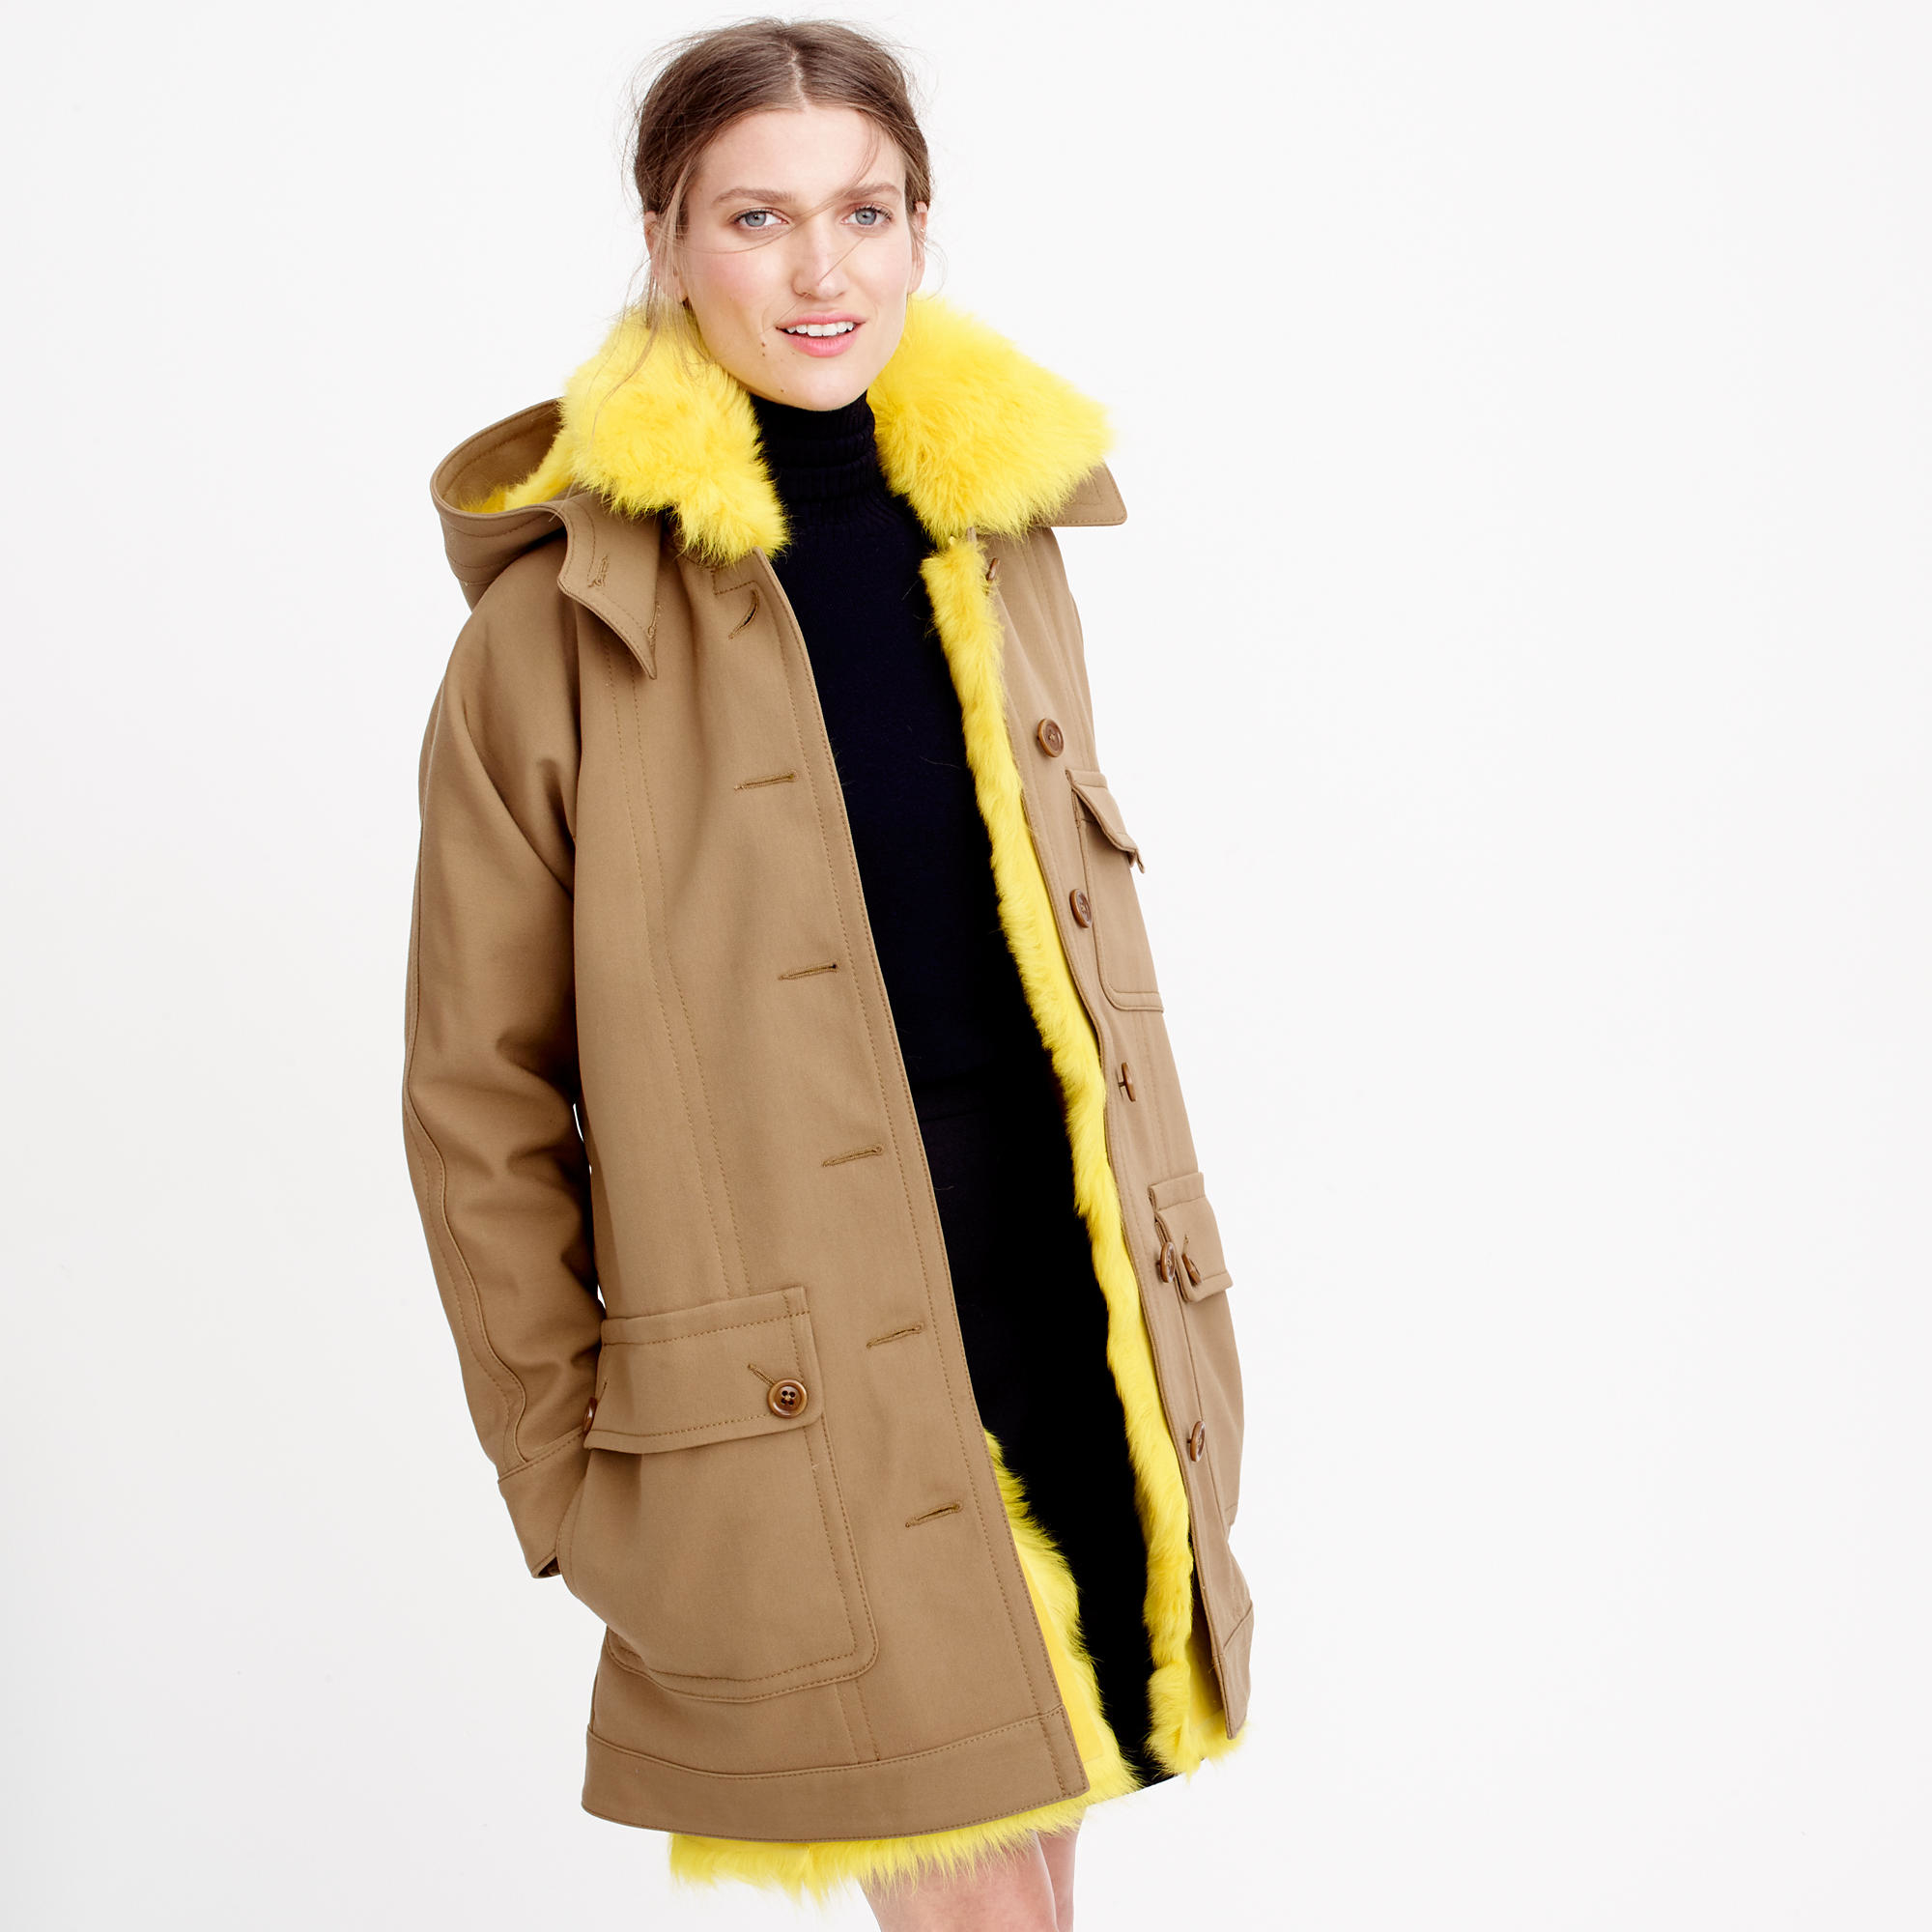 Lyst - J.Crew Collection Coat With Canary Shearling Lining in Brown